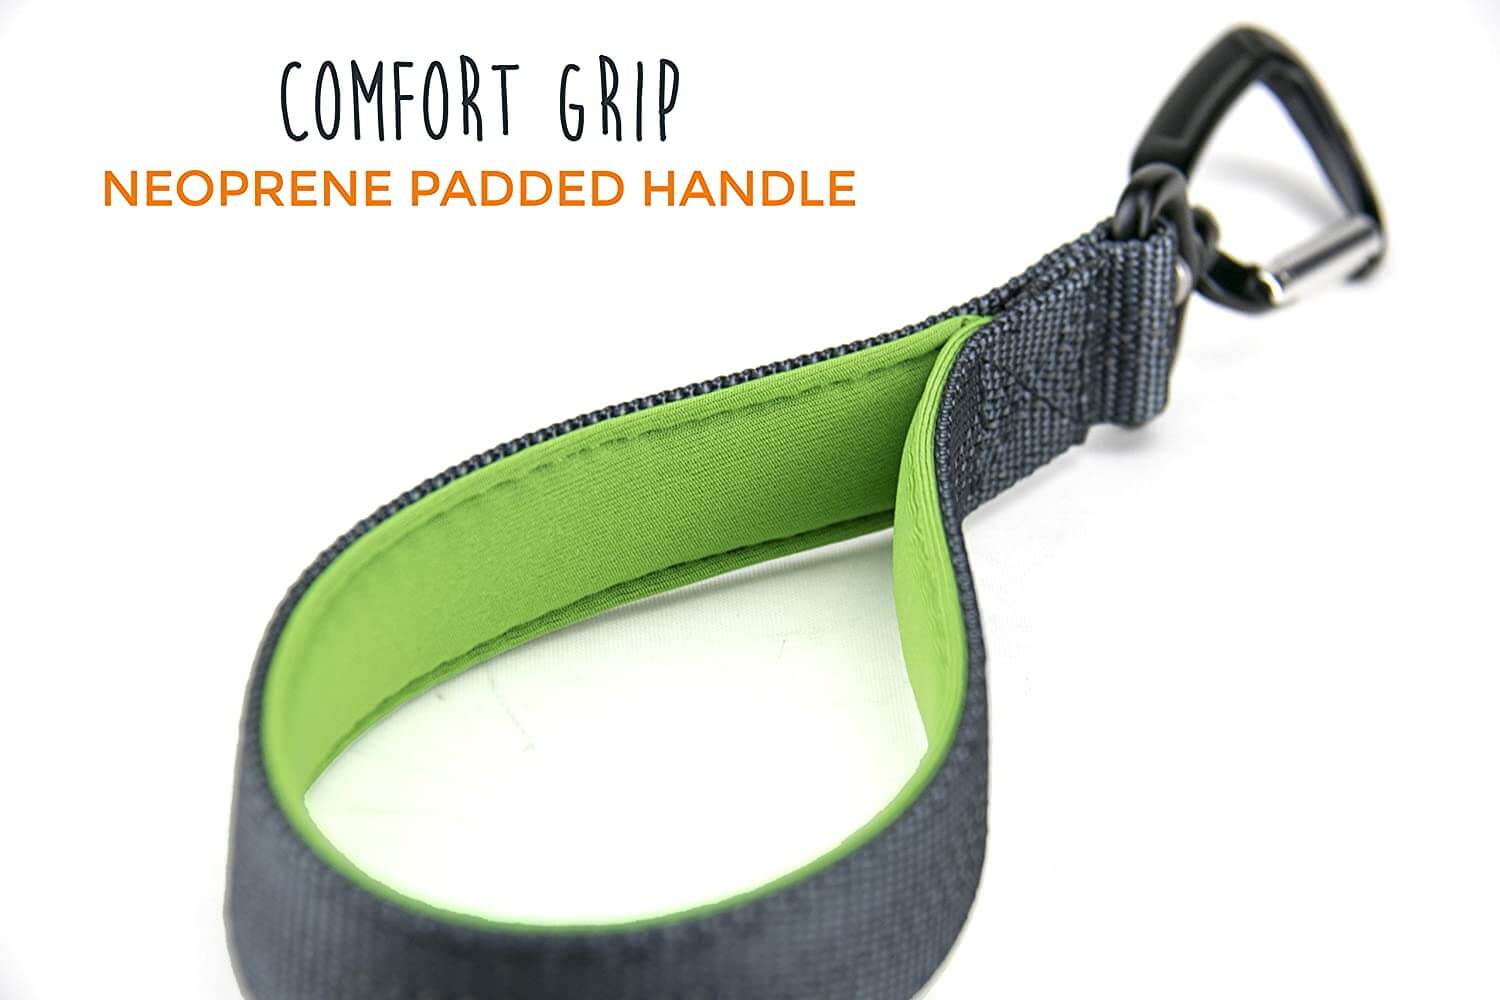 Compact Dog Leash Tab for Service Handlers and Training